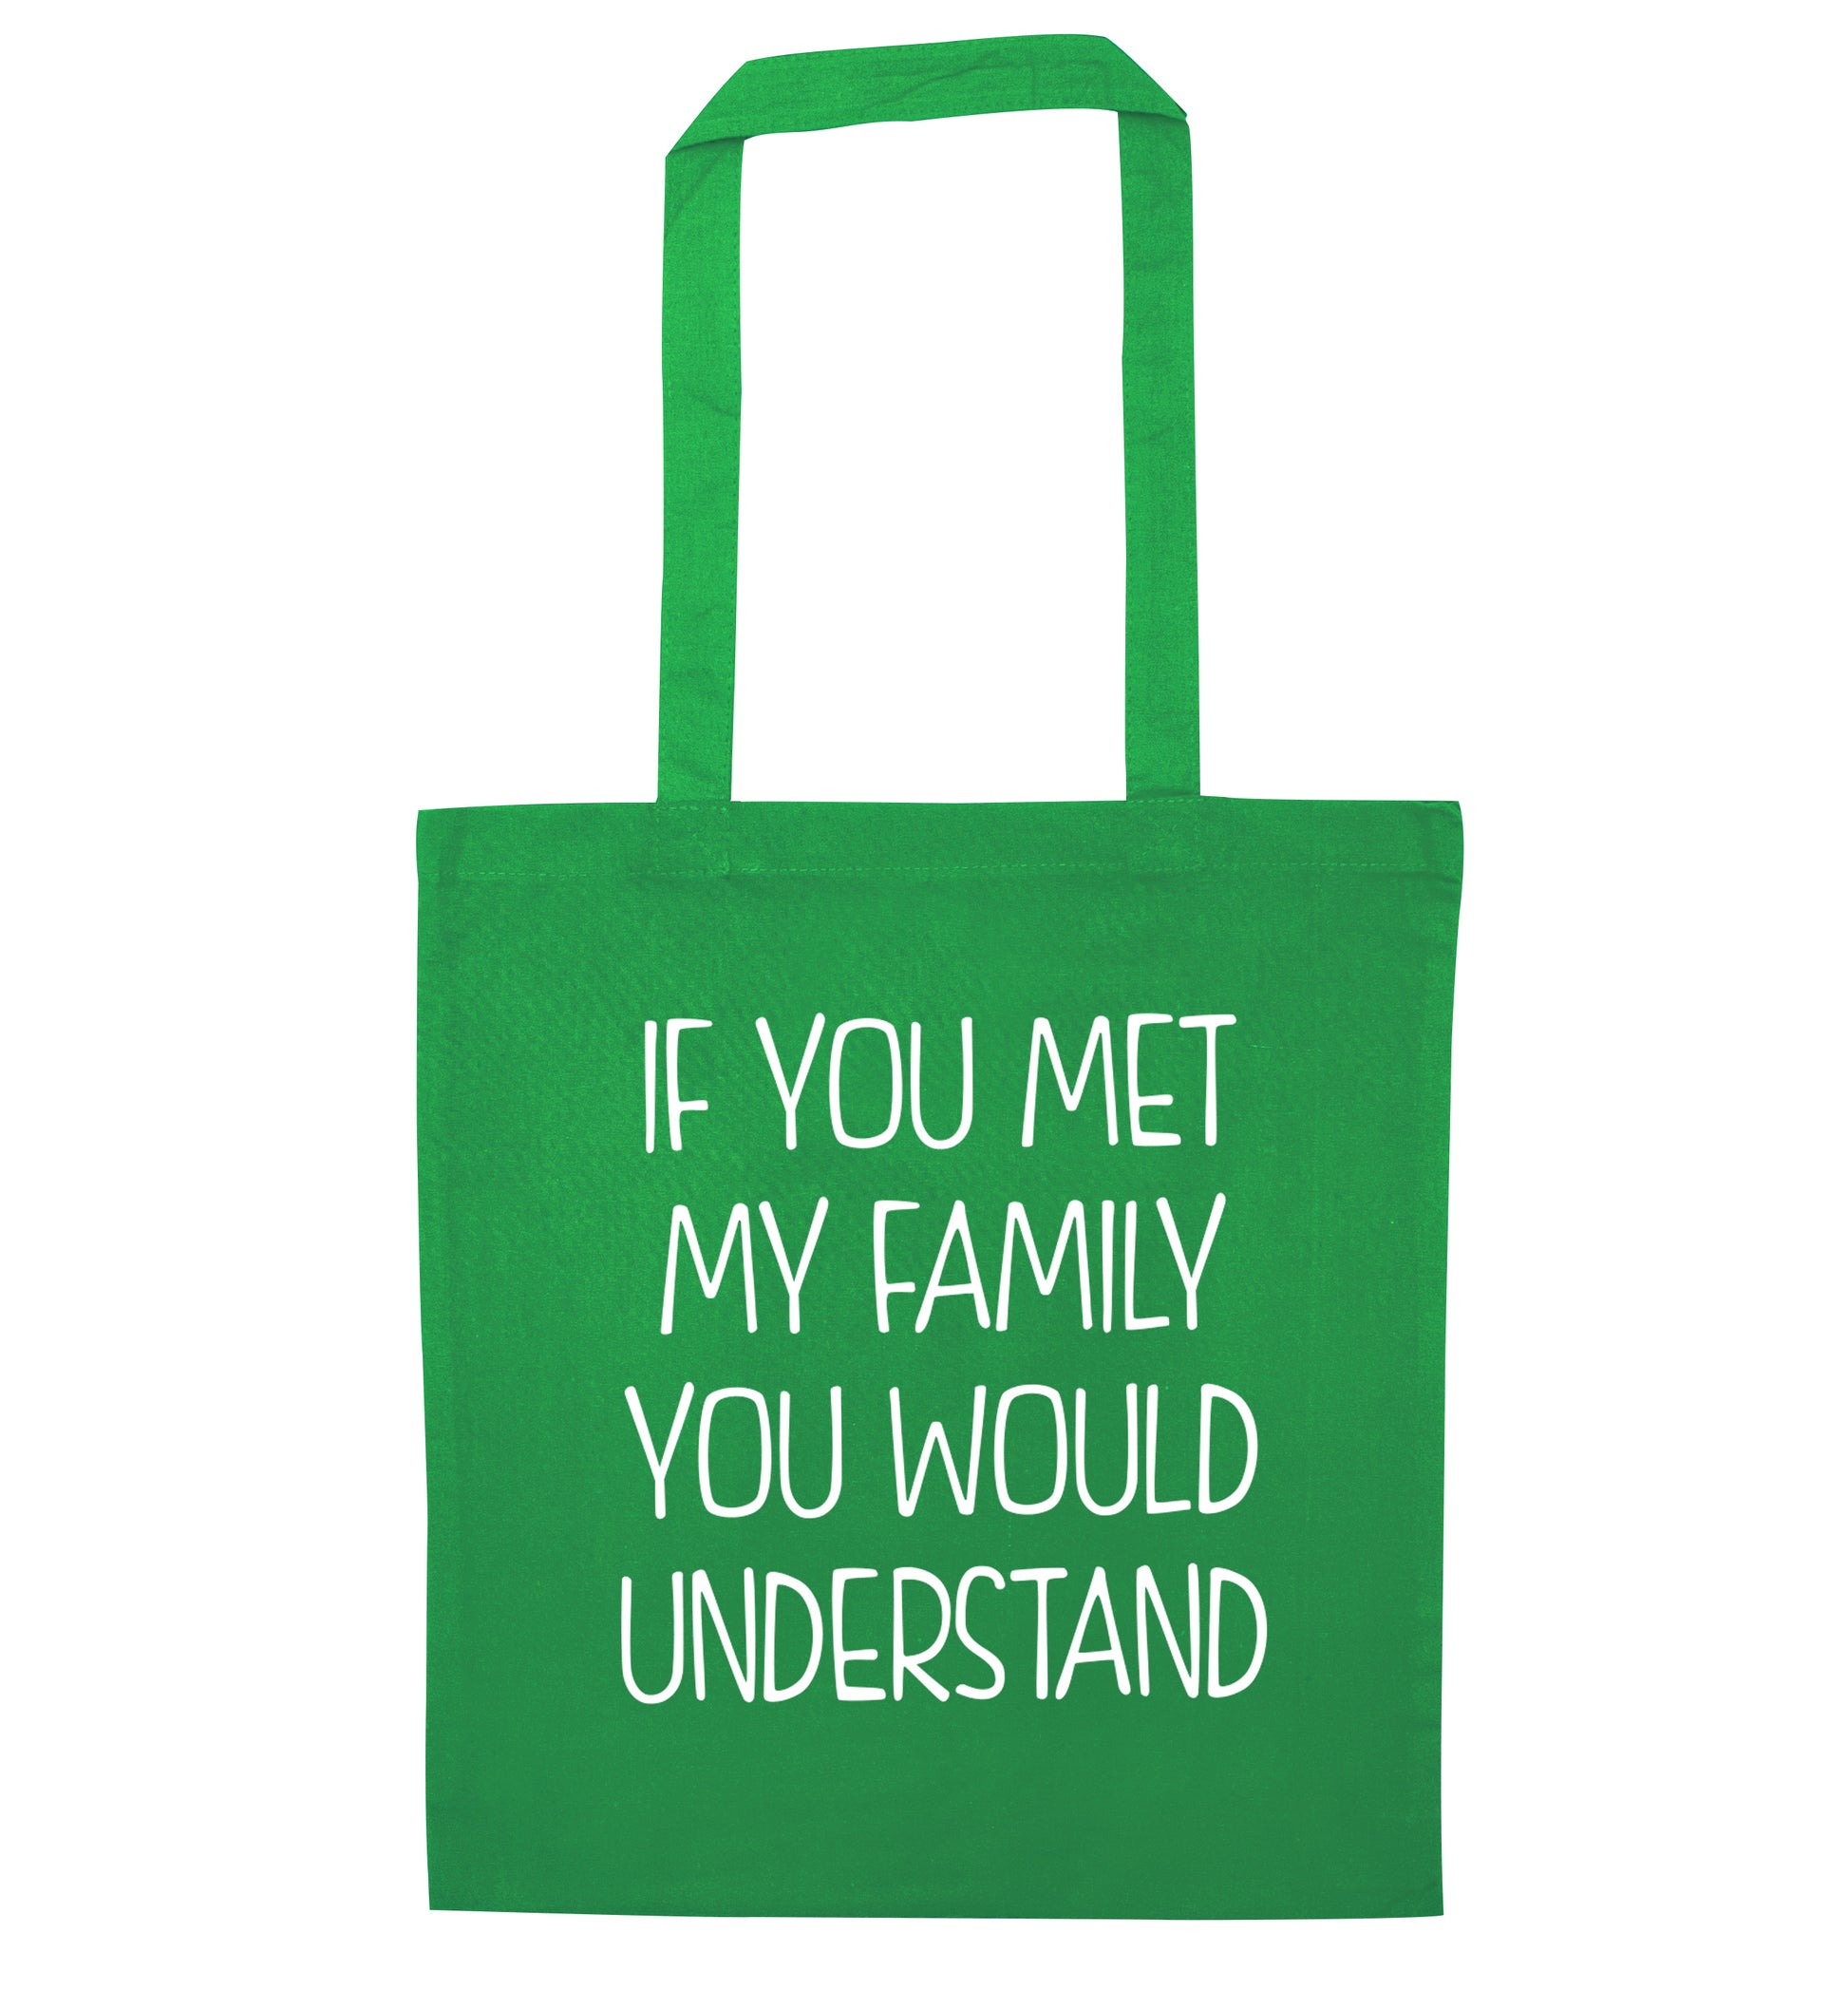 If you met my family you would understand green tote bag